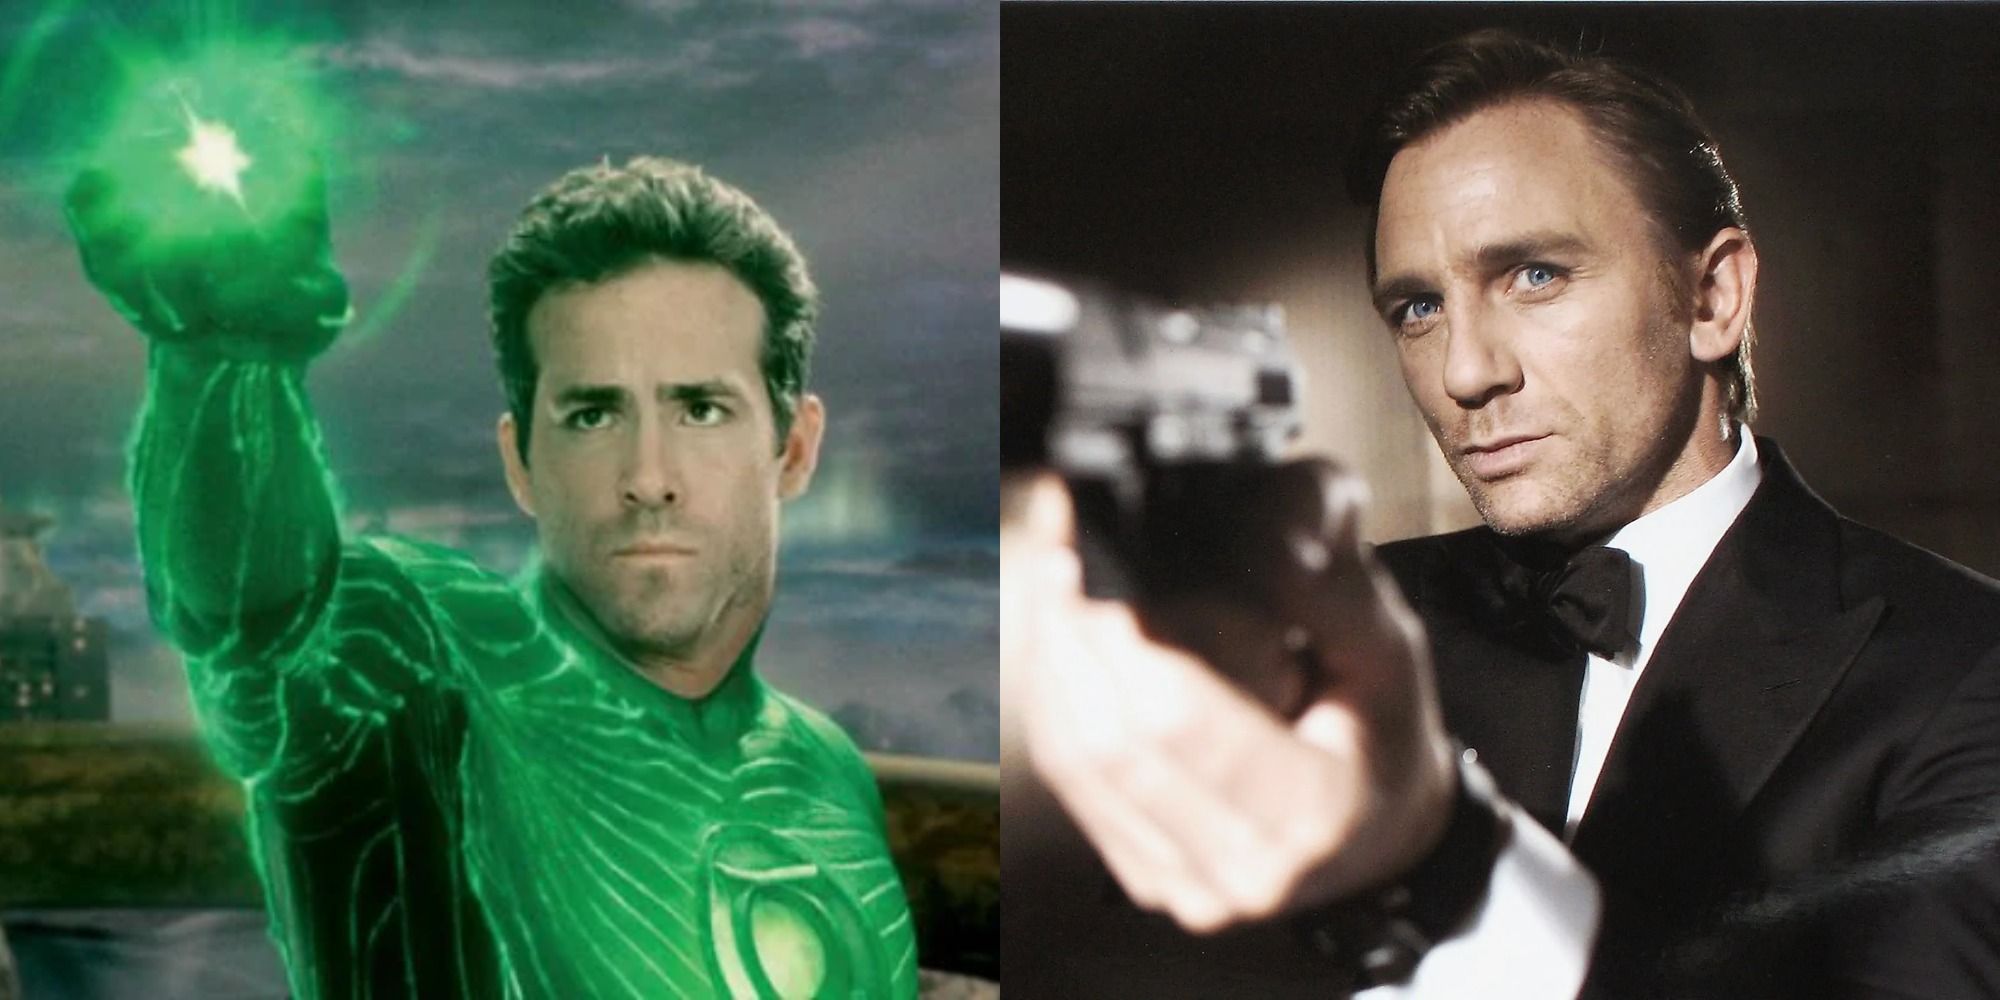 Side-by-side photo of Green Lantern and Casino Royale